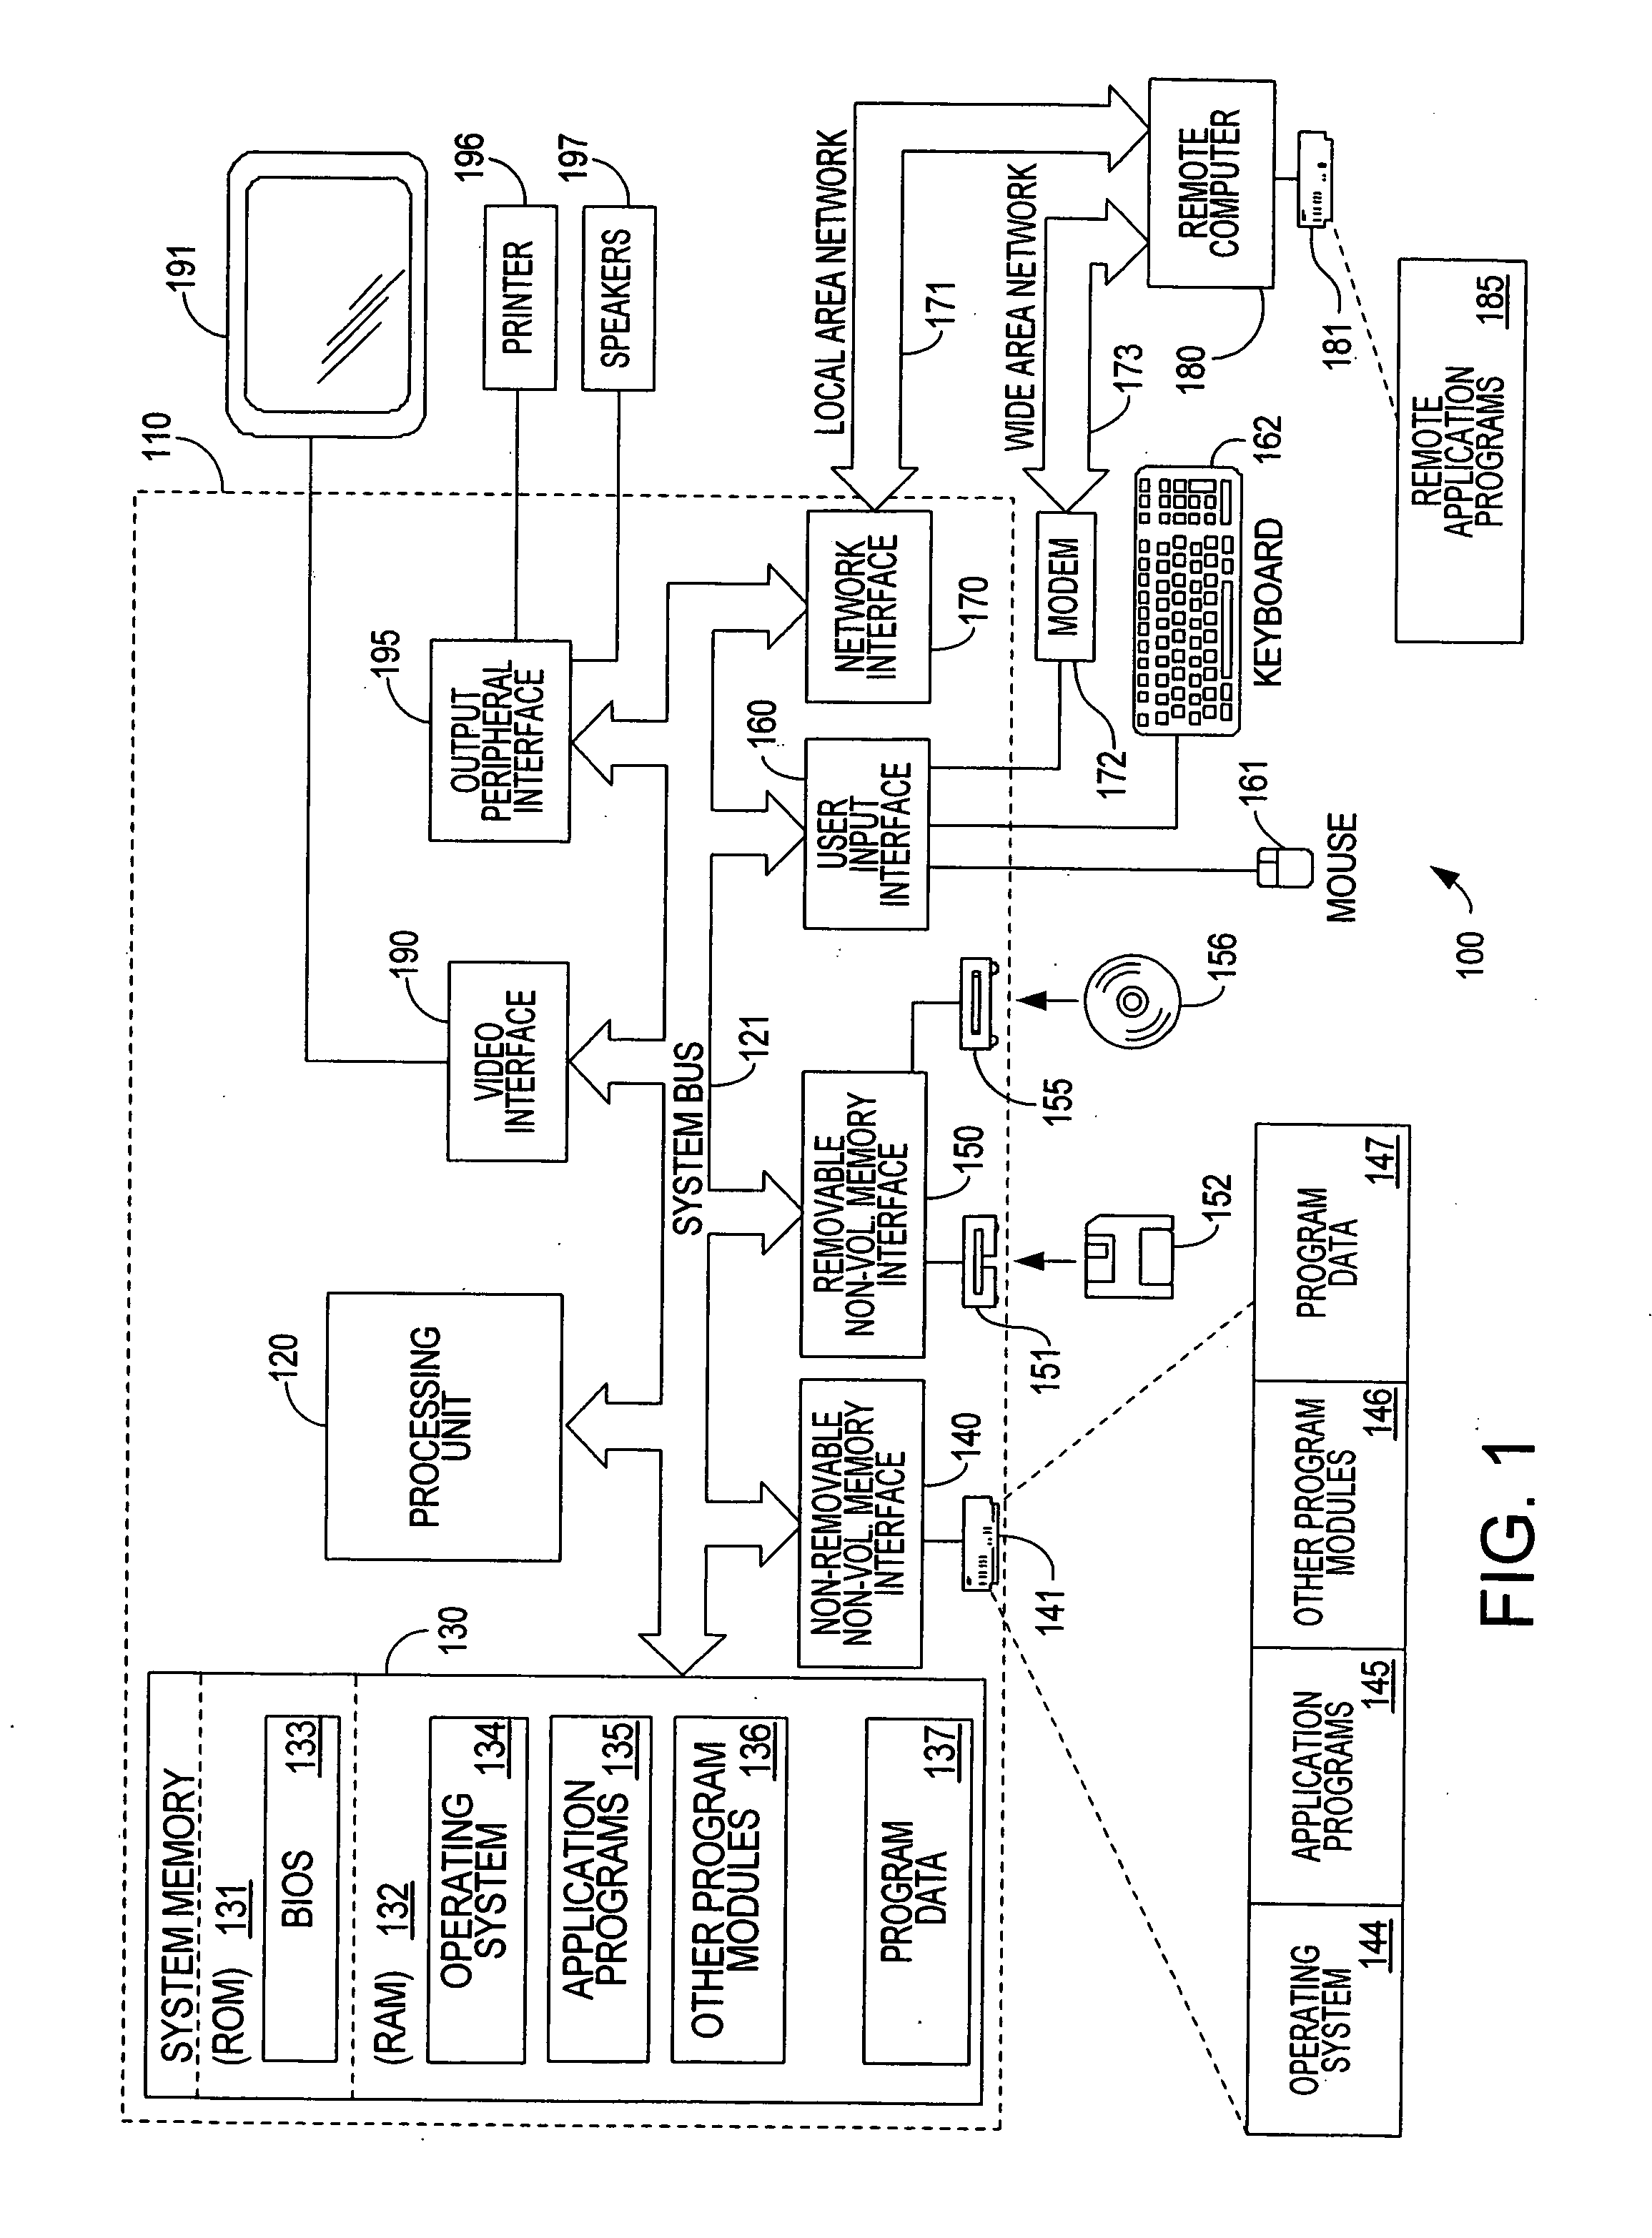 Methods and systems for structuring asynchronous processes